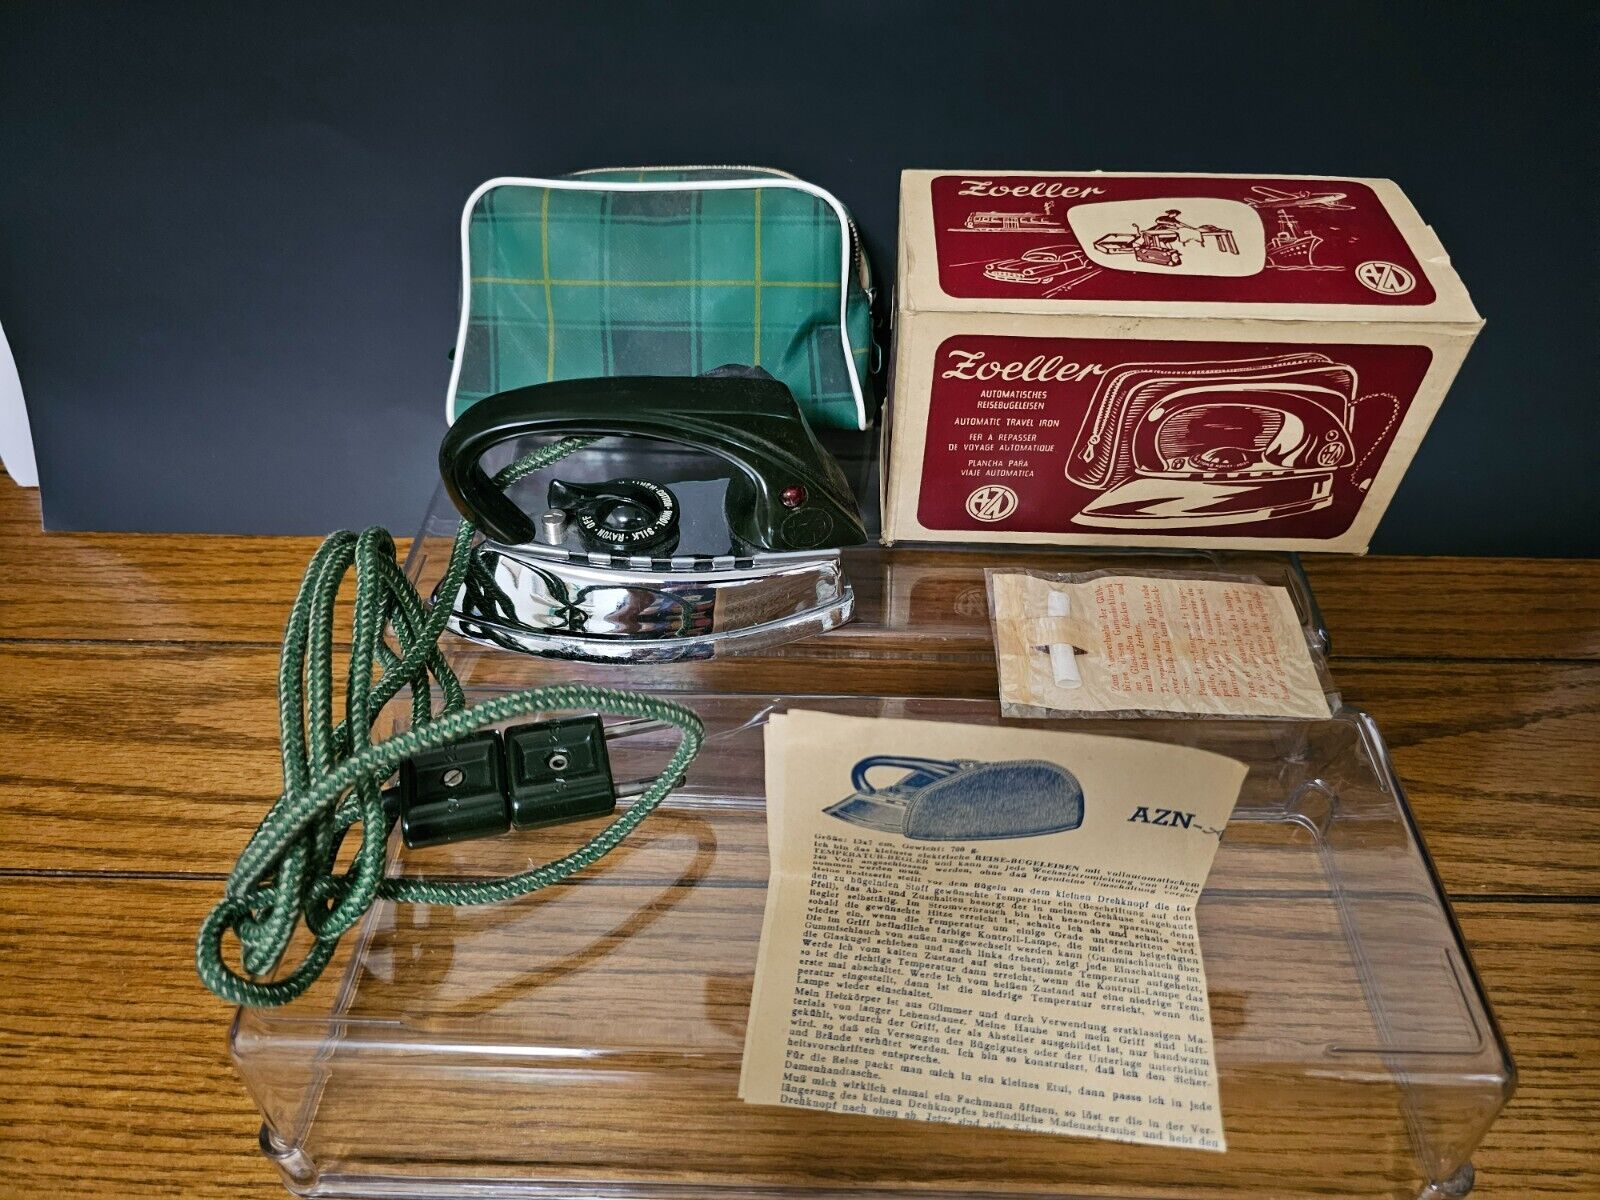 VINTAGE ZOELLER AUTOMATIC TRAVEL IRON #351/355 (WEST GERMANY)